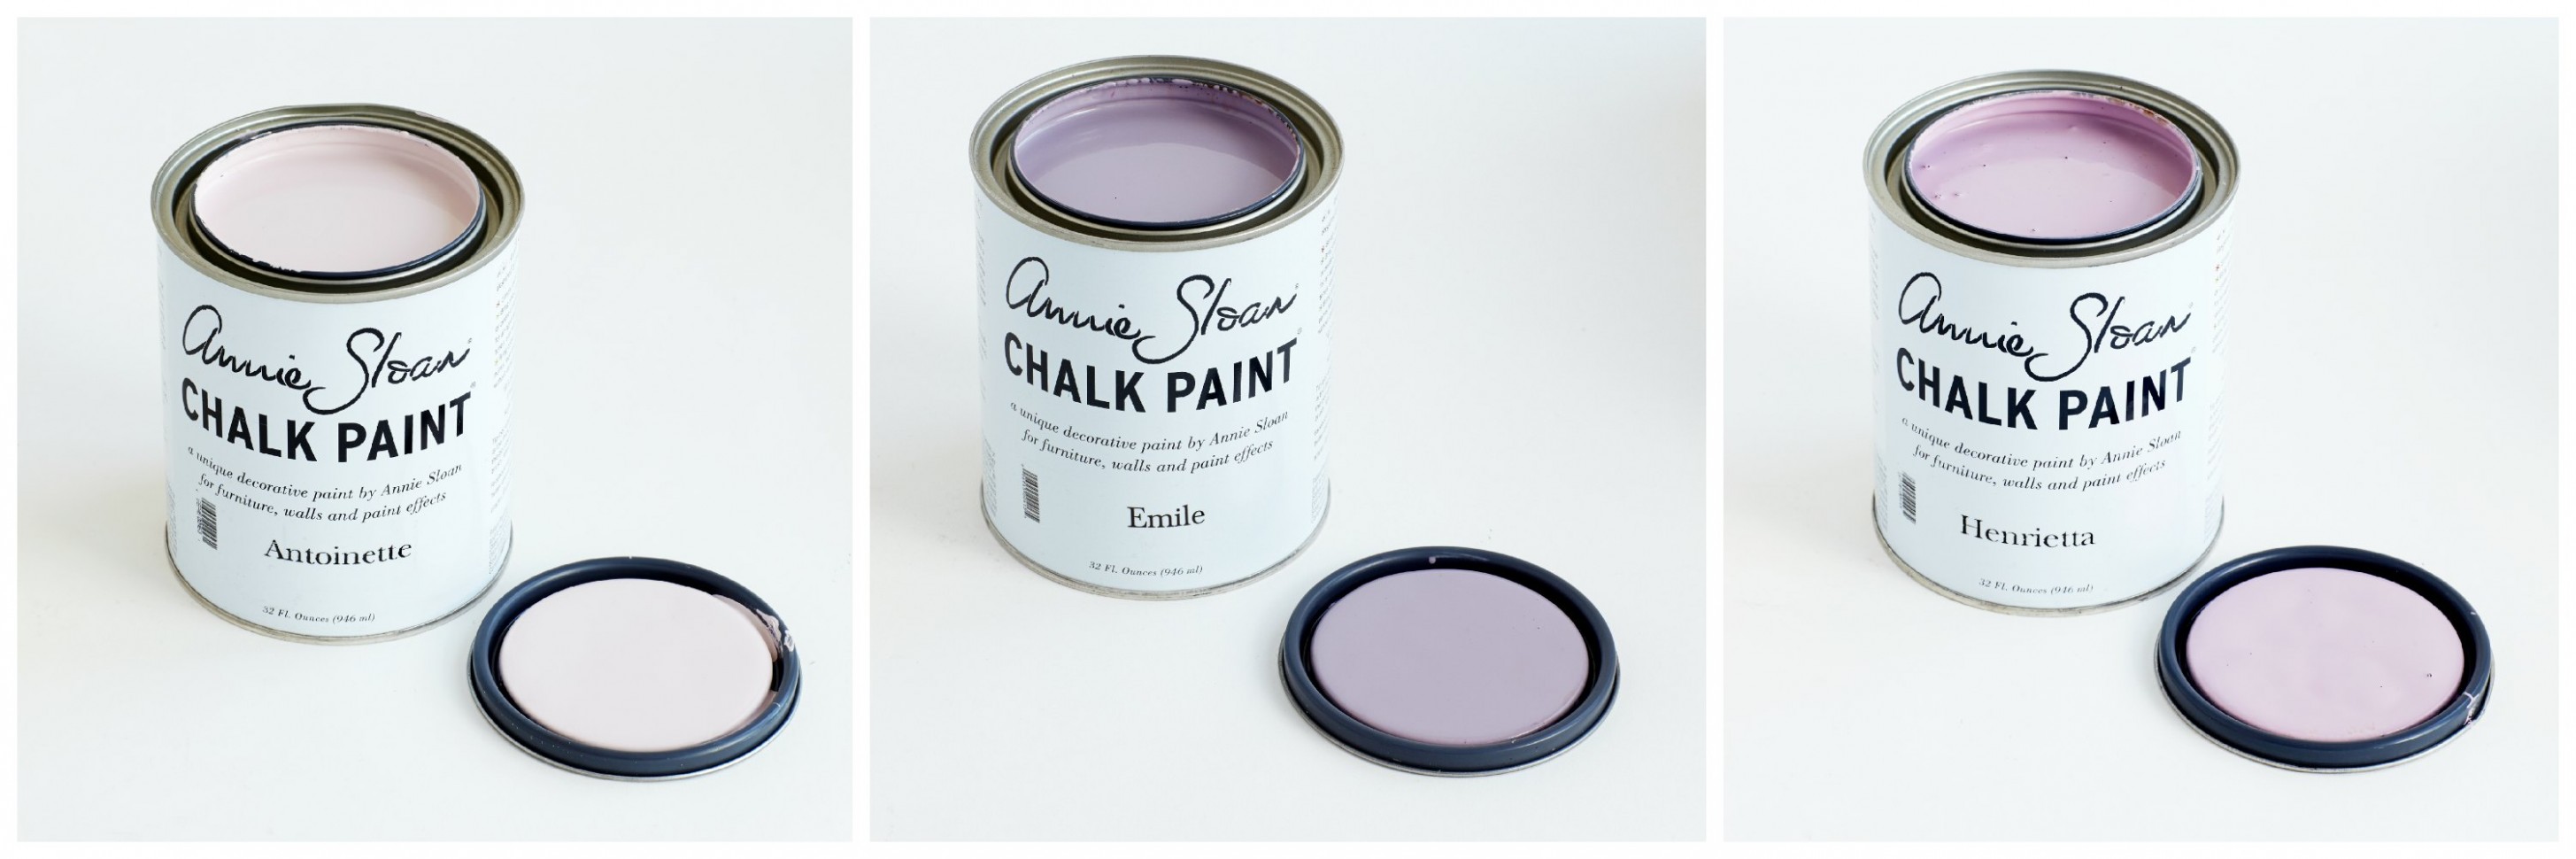 Posh Pink Paint Stirs Speculation That Kate Middleton Is Having A ..